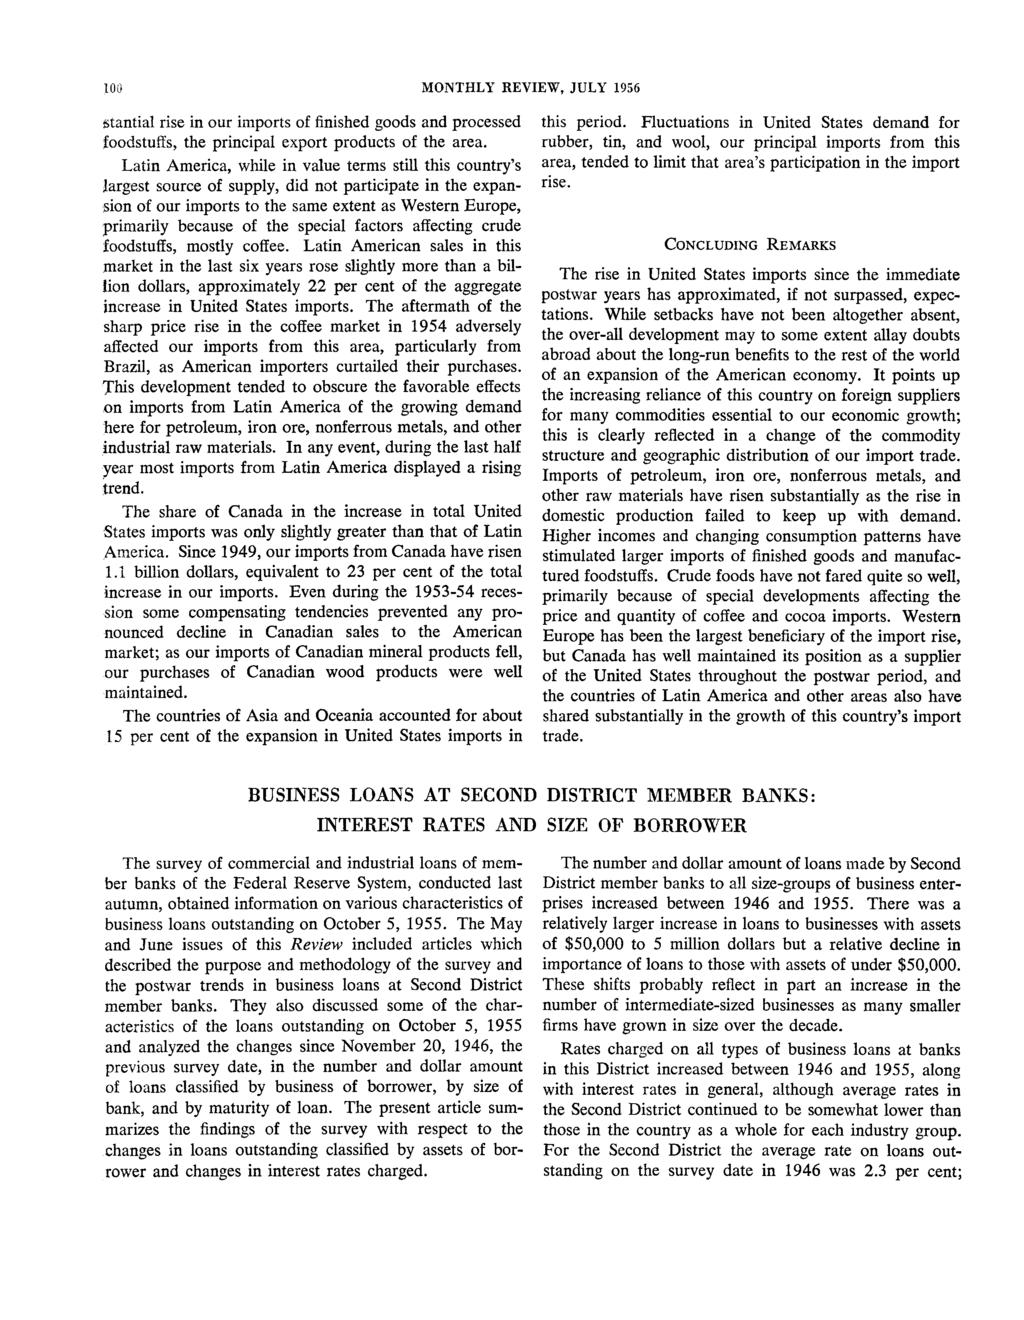 100 MONTHLY REVIEW, JULY 1956 Stantial rise in our imports of finished goods and processed foodstuffs, the principal export products of the area.